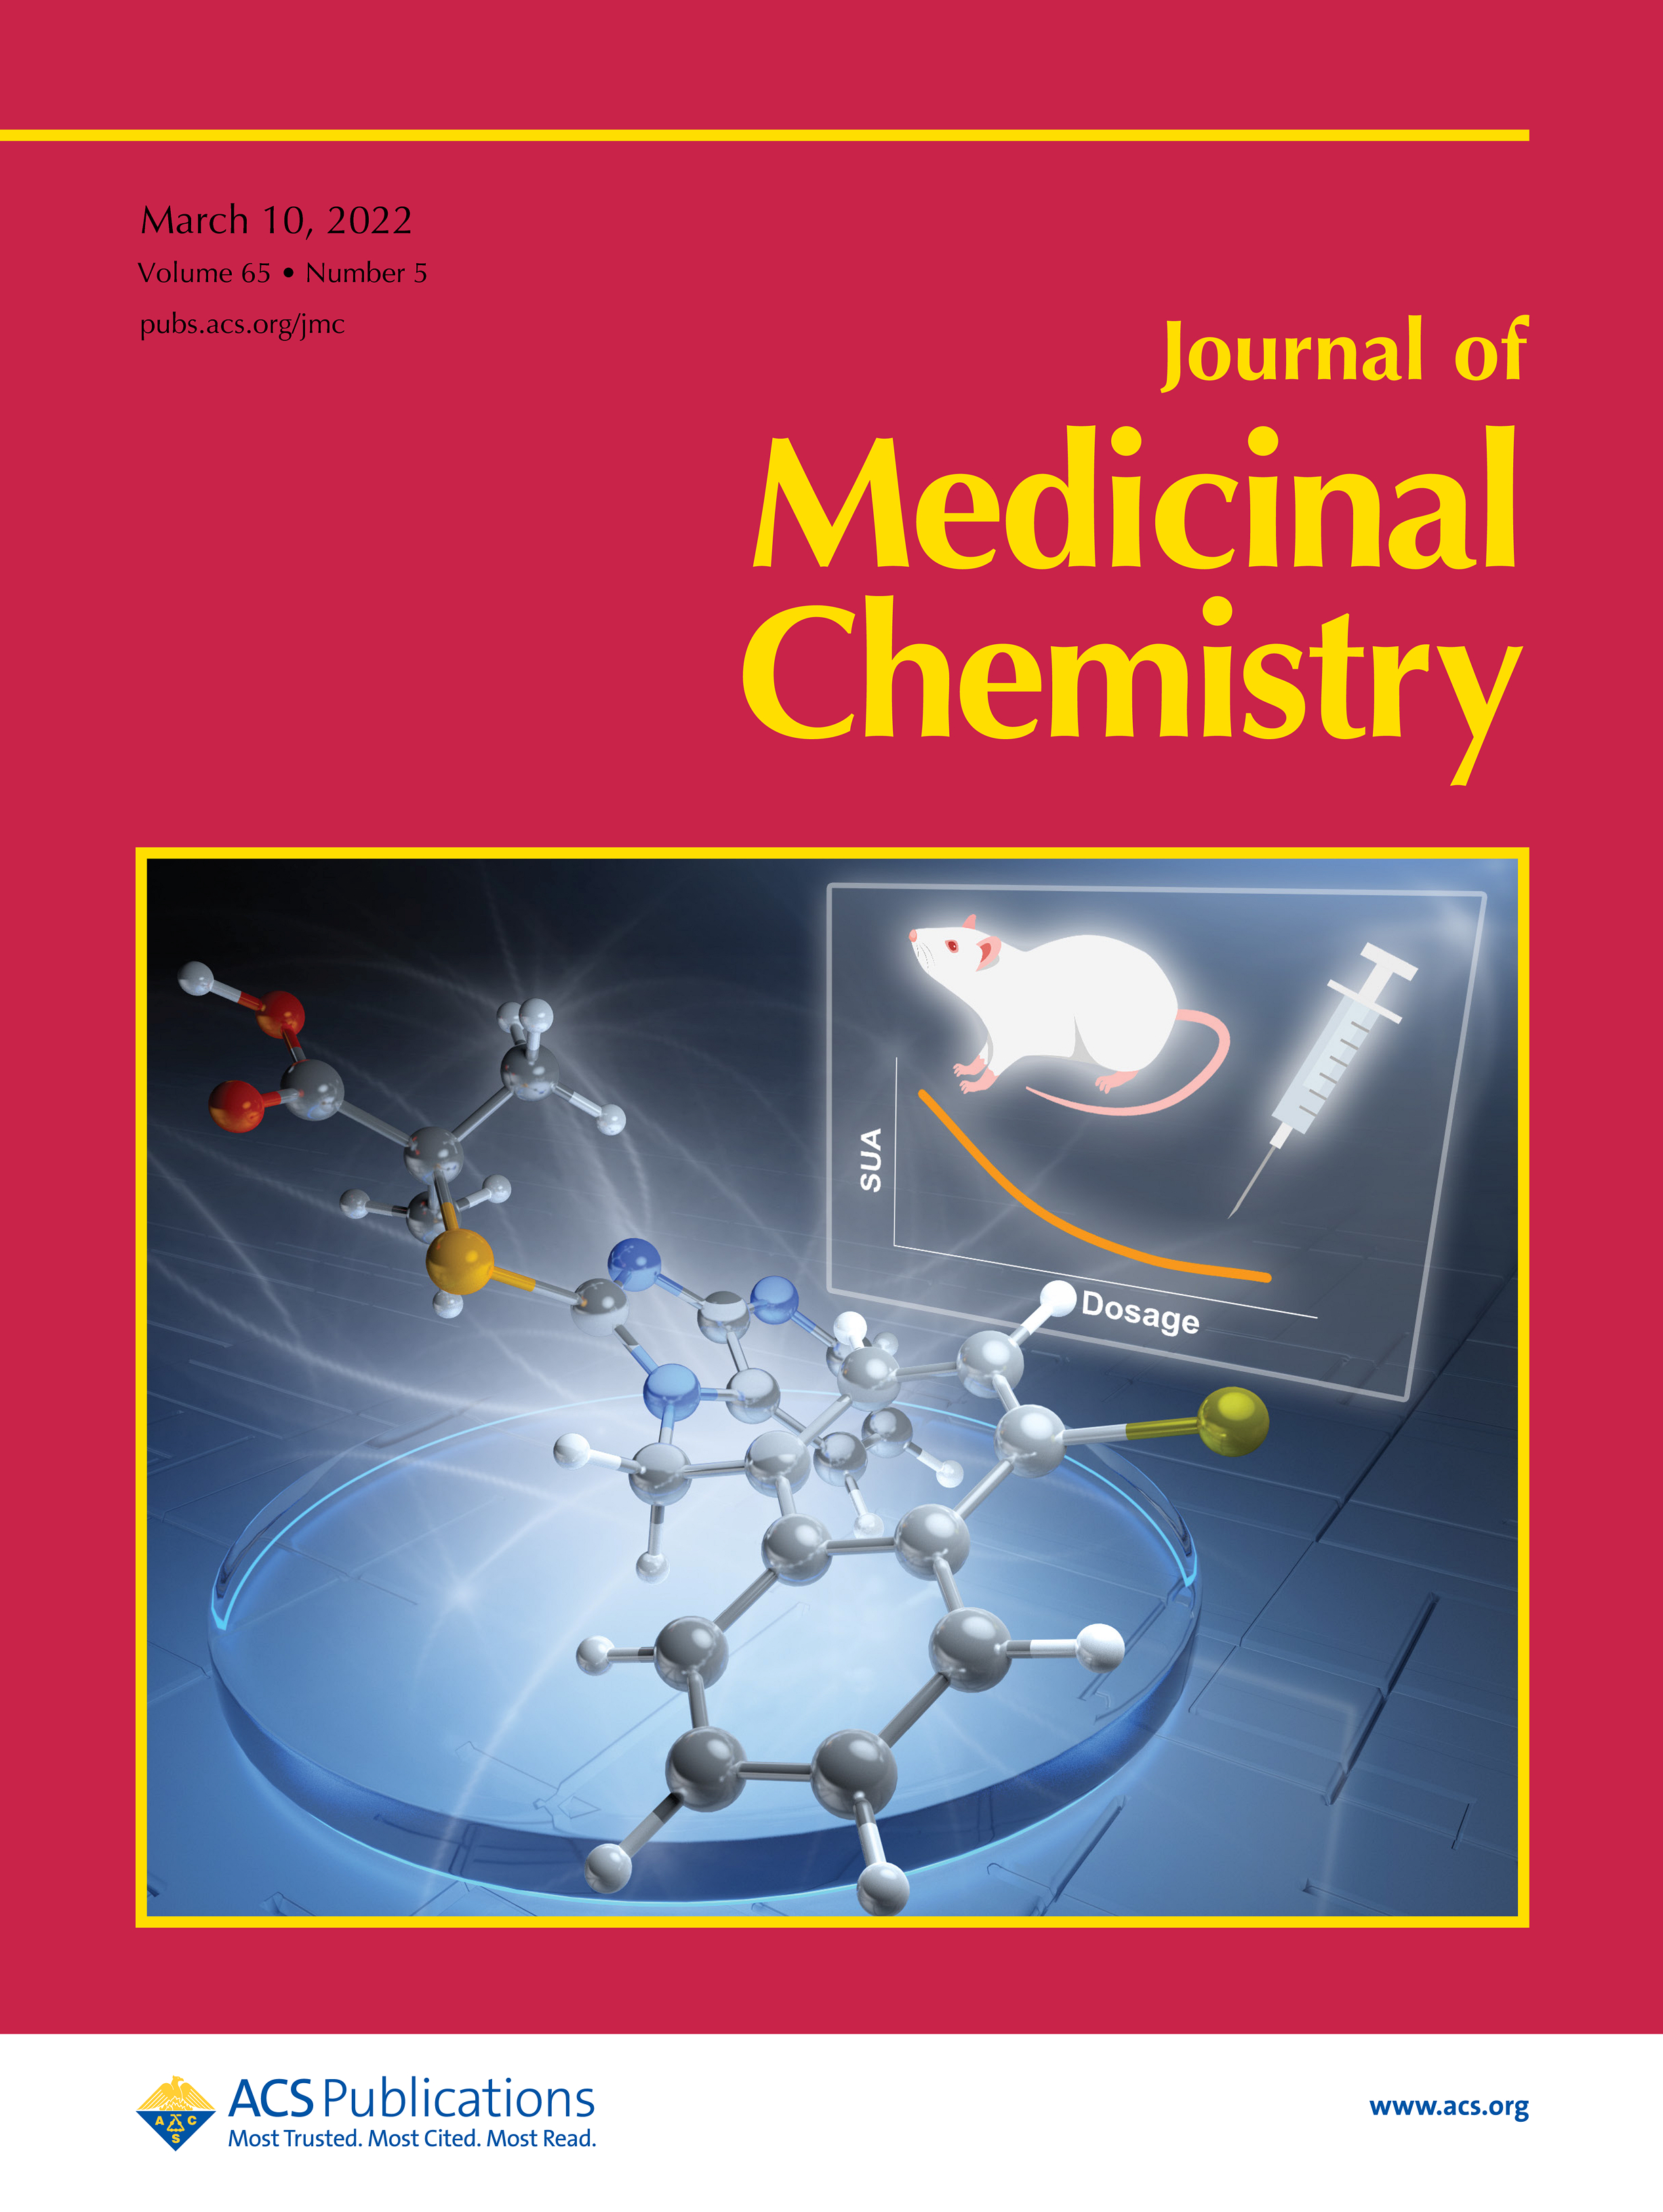 LetPub Journal Cover Art Design - Discovery of Novel Bicyclic Imidazolopyridine-Containing Human Urate Transporter 1 Inhibitors as Hypouricemic Drug Candidates with Improved Efficacy and Favorable Druggability